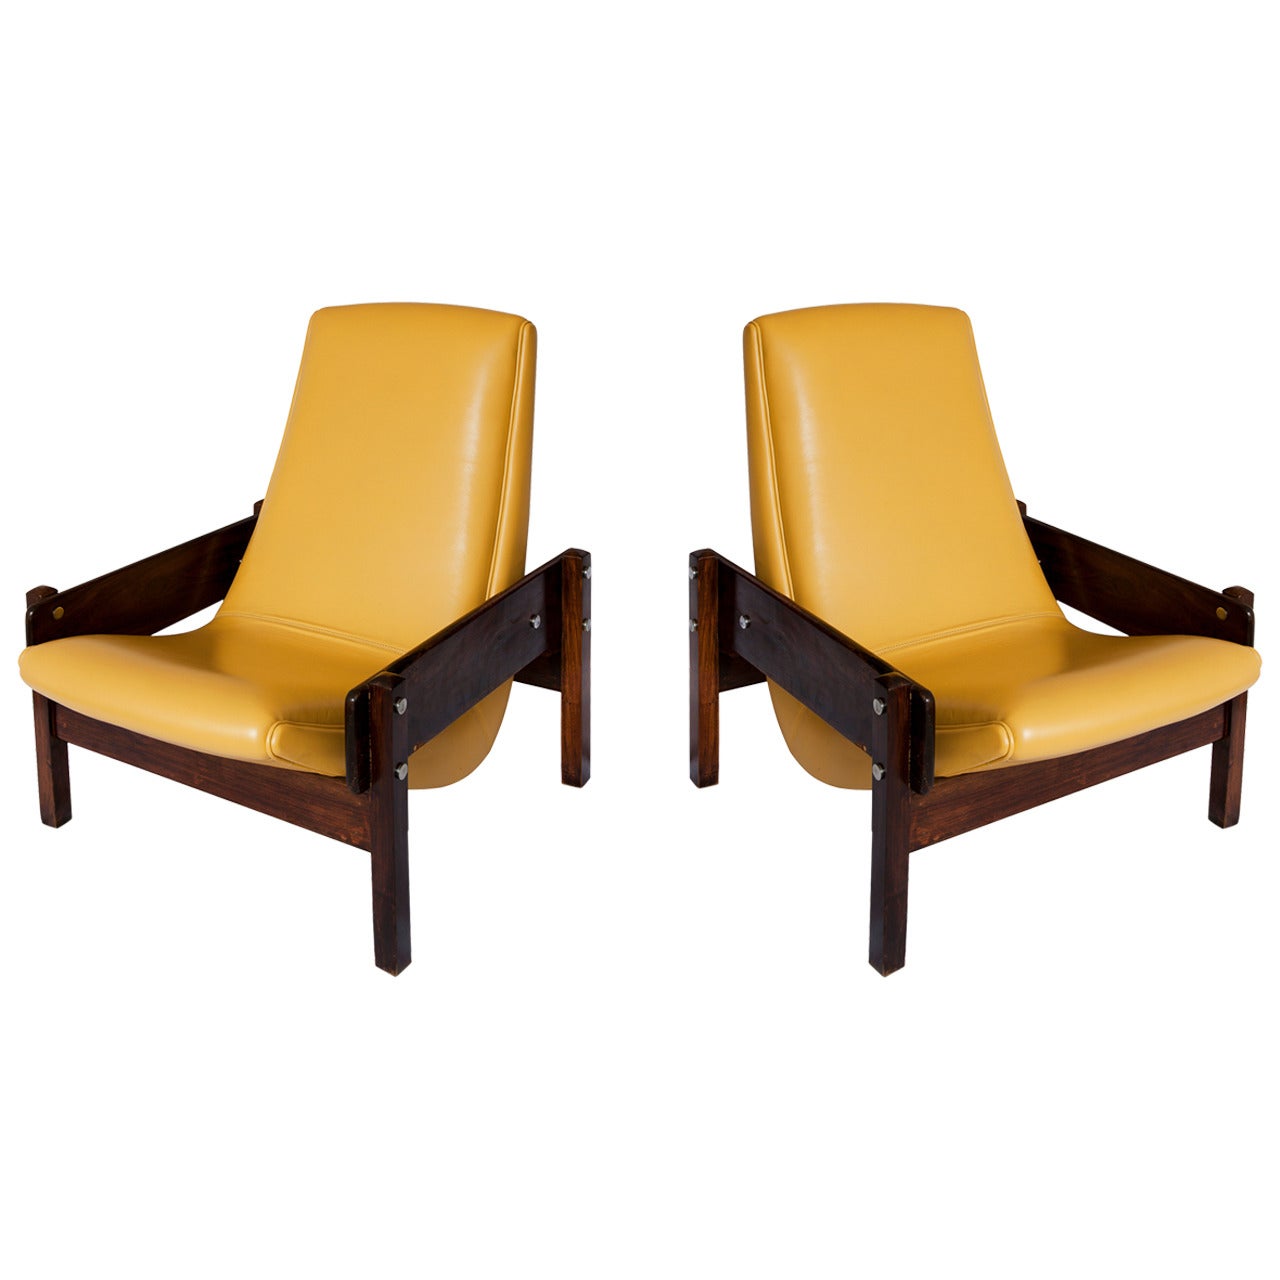 Rare Pair of "Vronka" Chair by Sergio Rodrigues